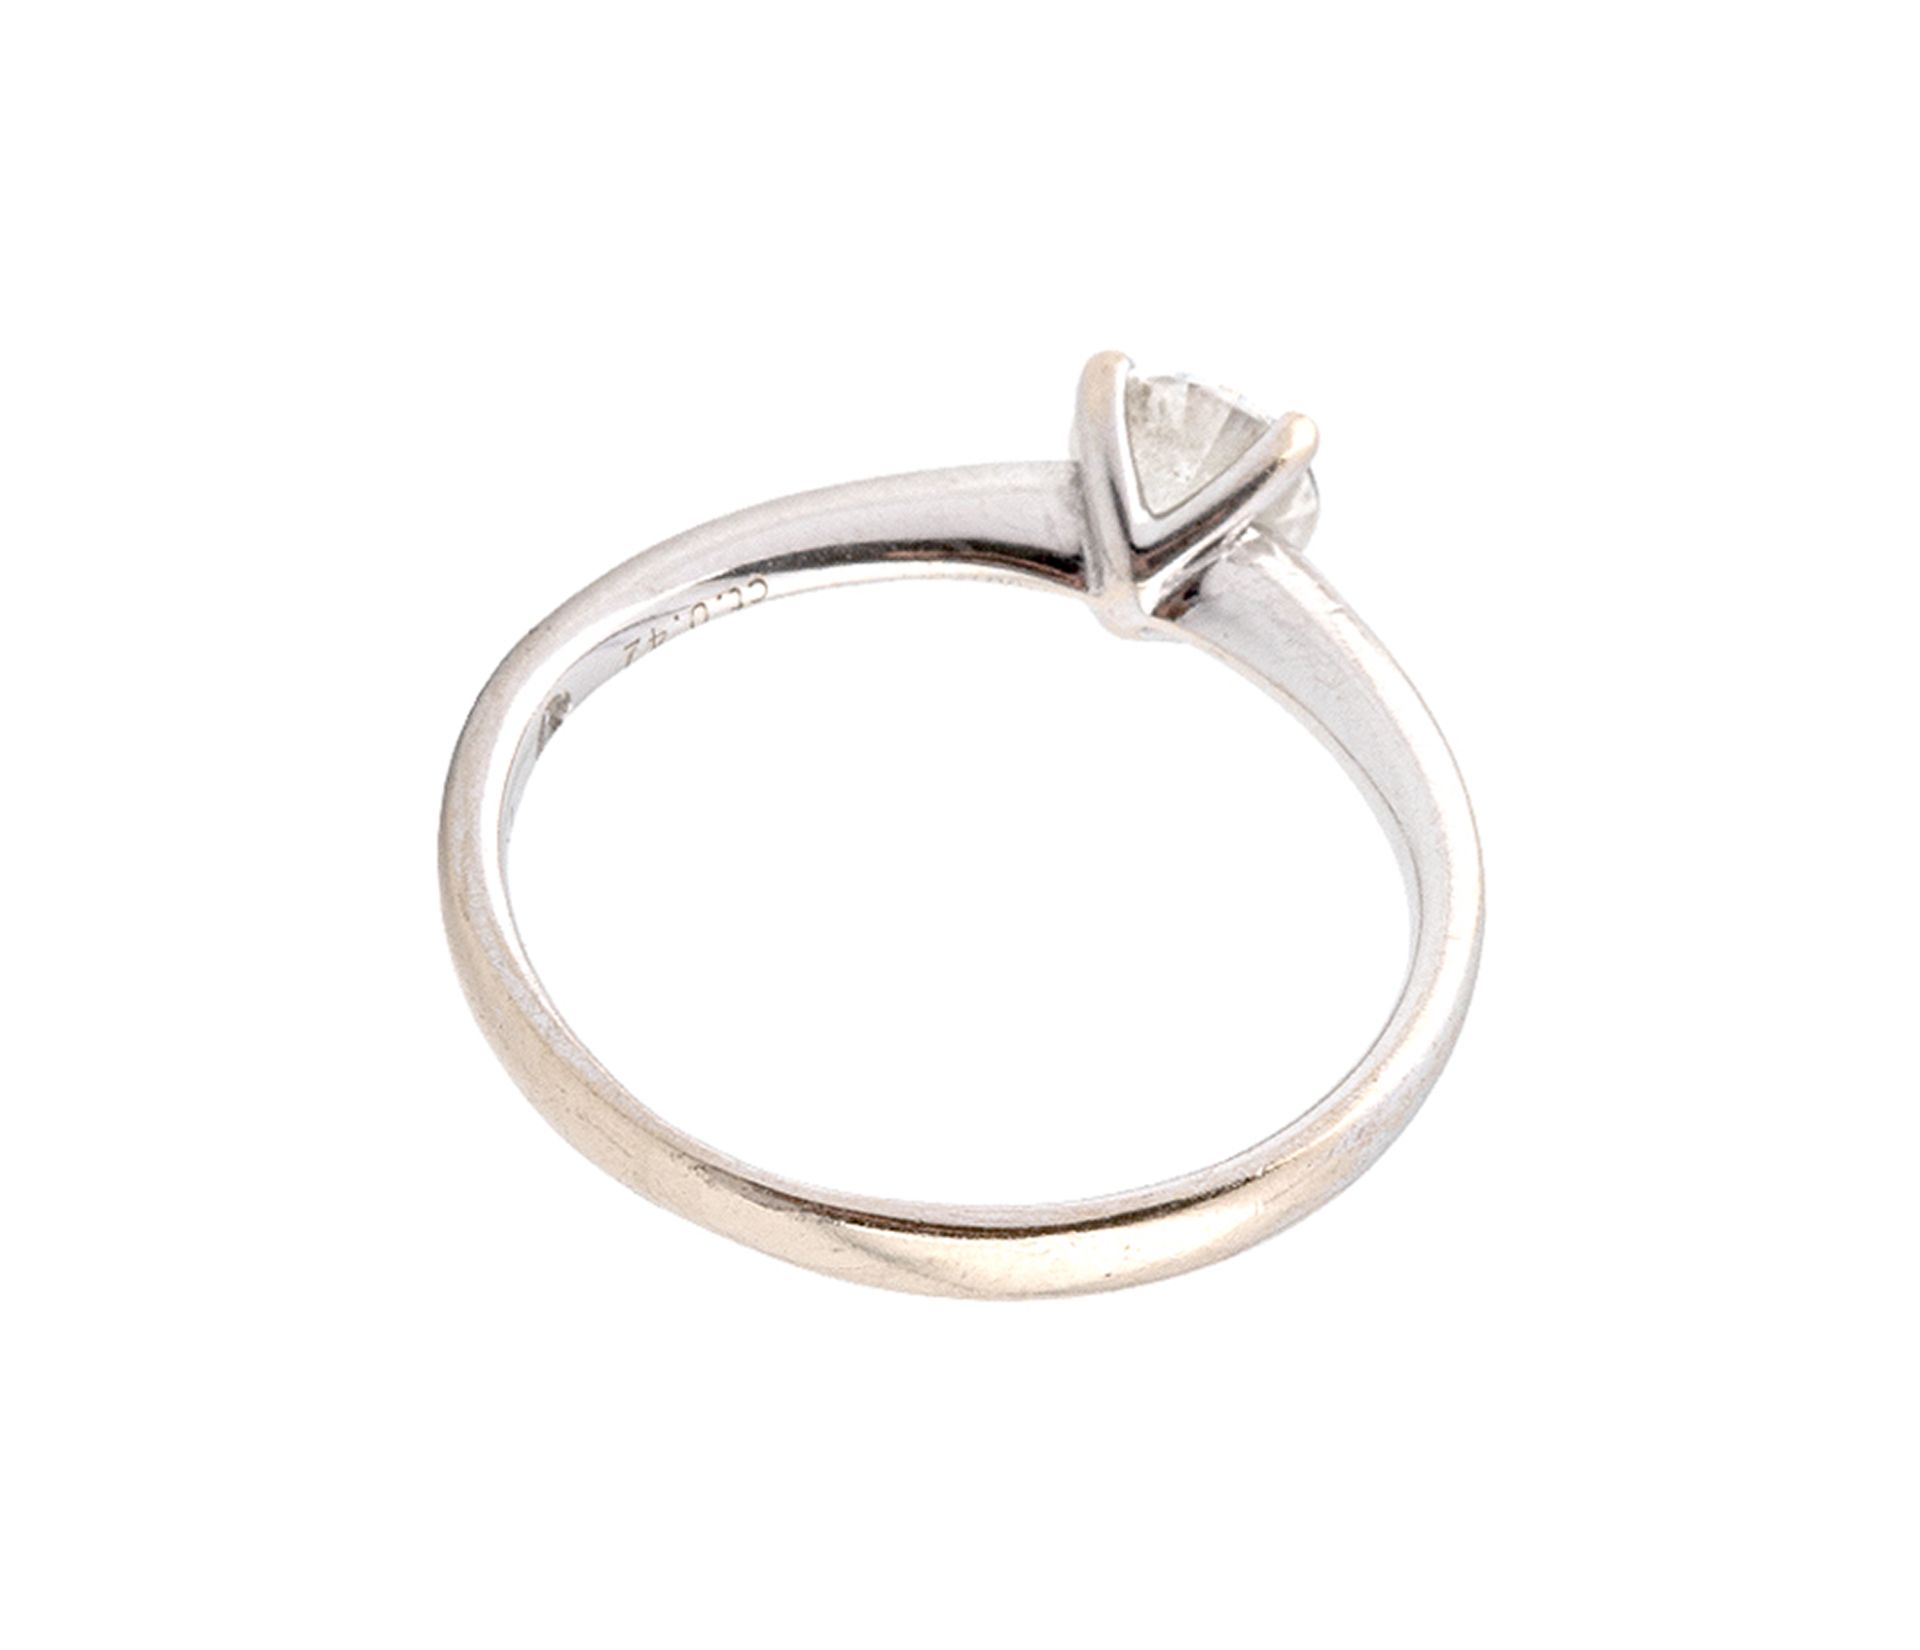 Solitaire ring in 18k white gold from the Rabat firm with a 0.42 ct central cut diamond - Bild 3 aus 3